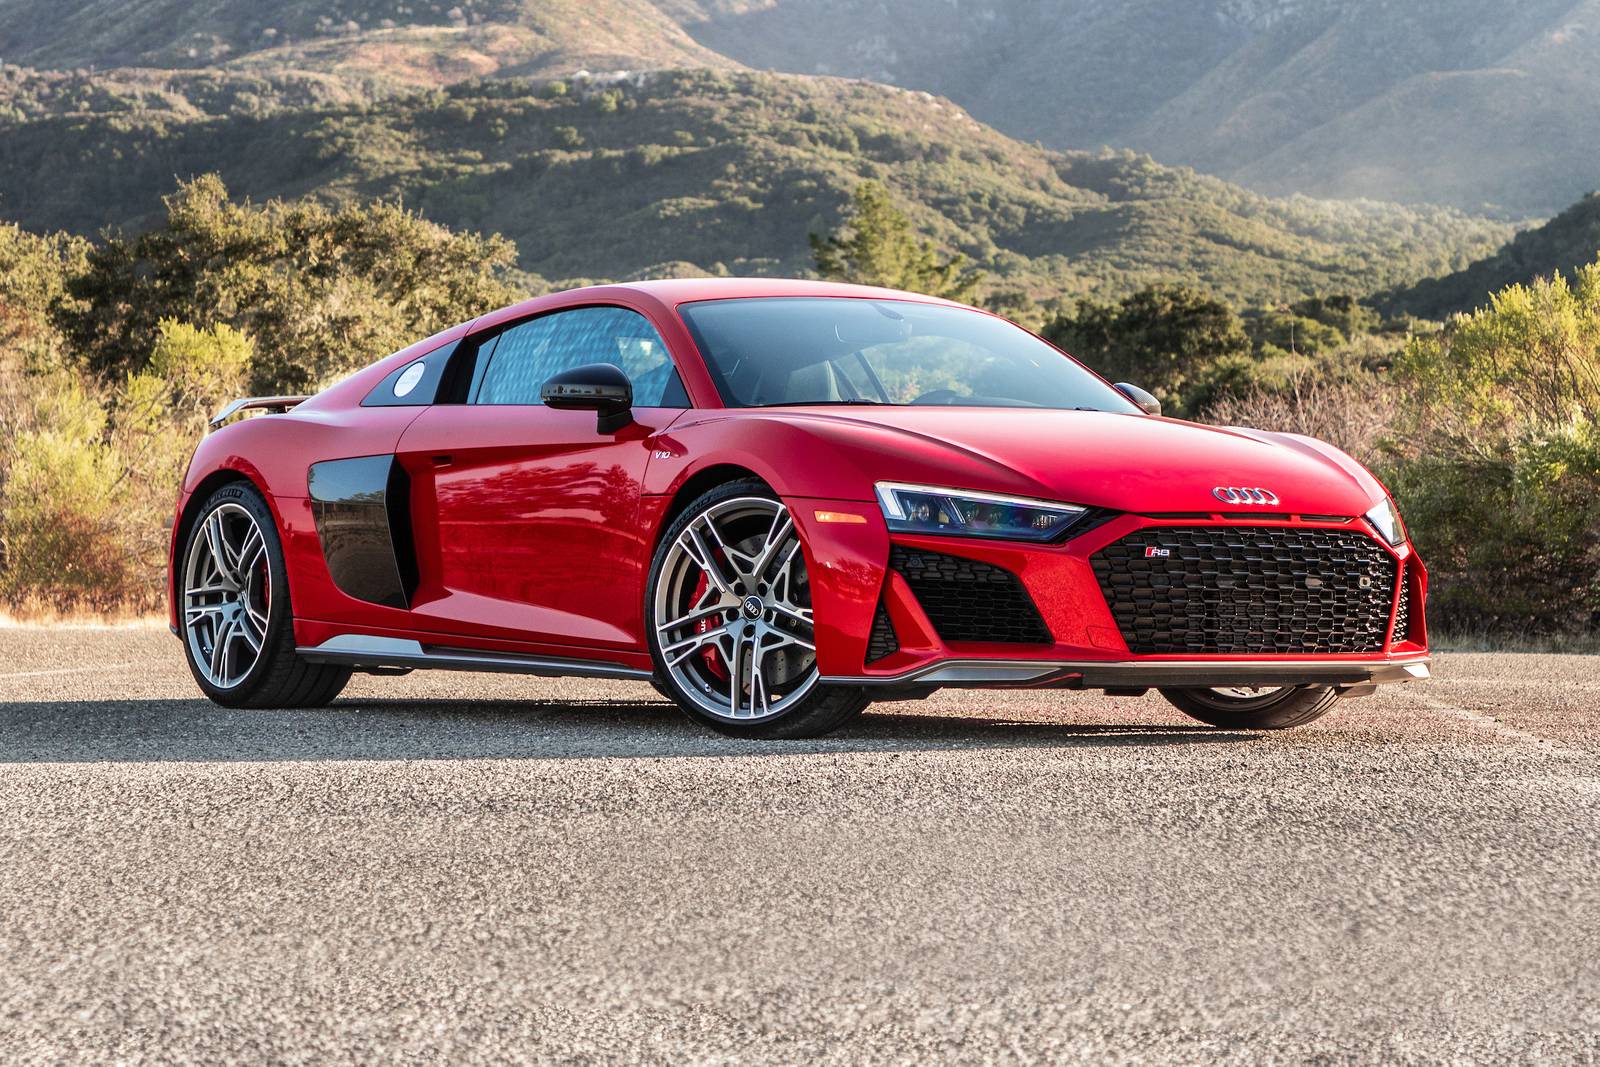 Hire A Audi R8 For An Hour In Dubai